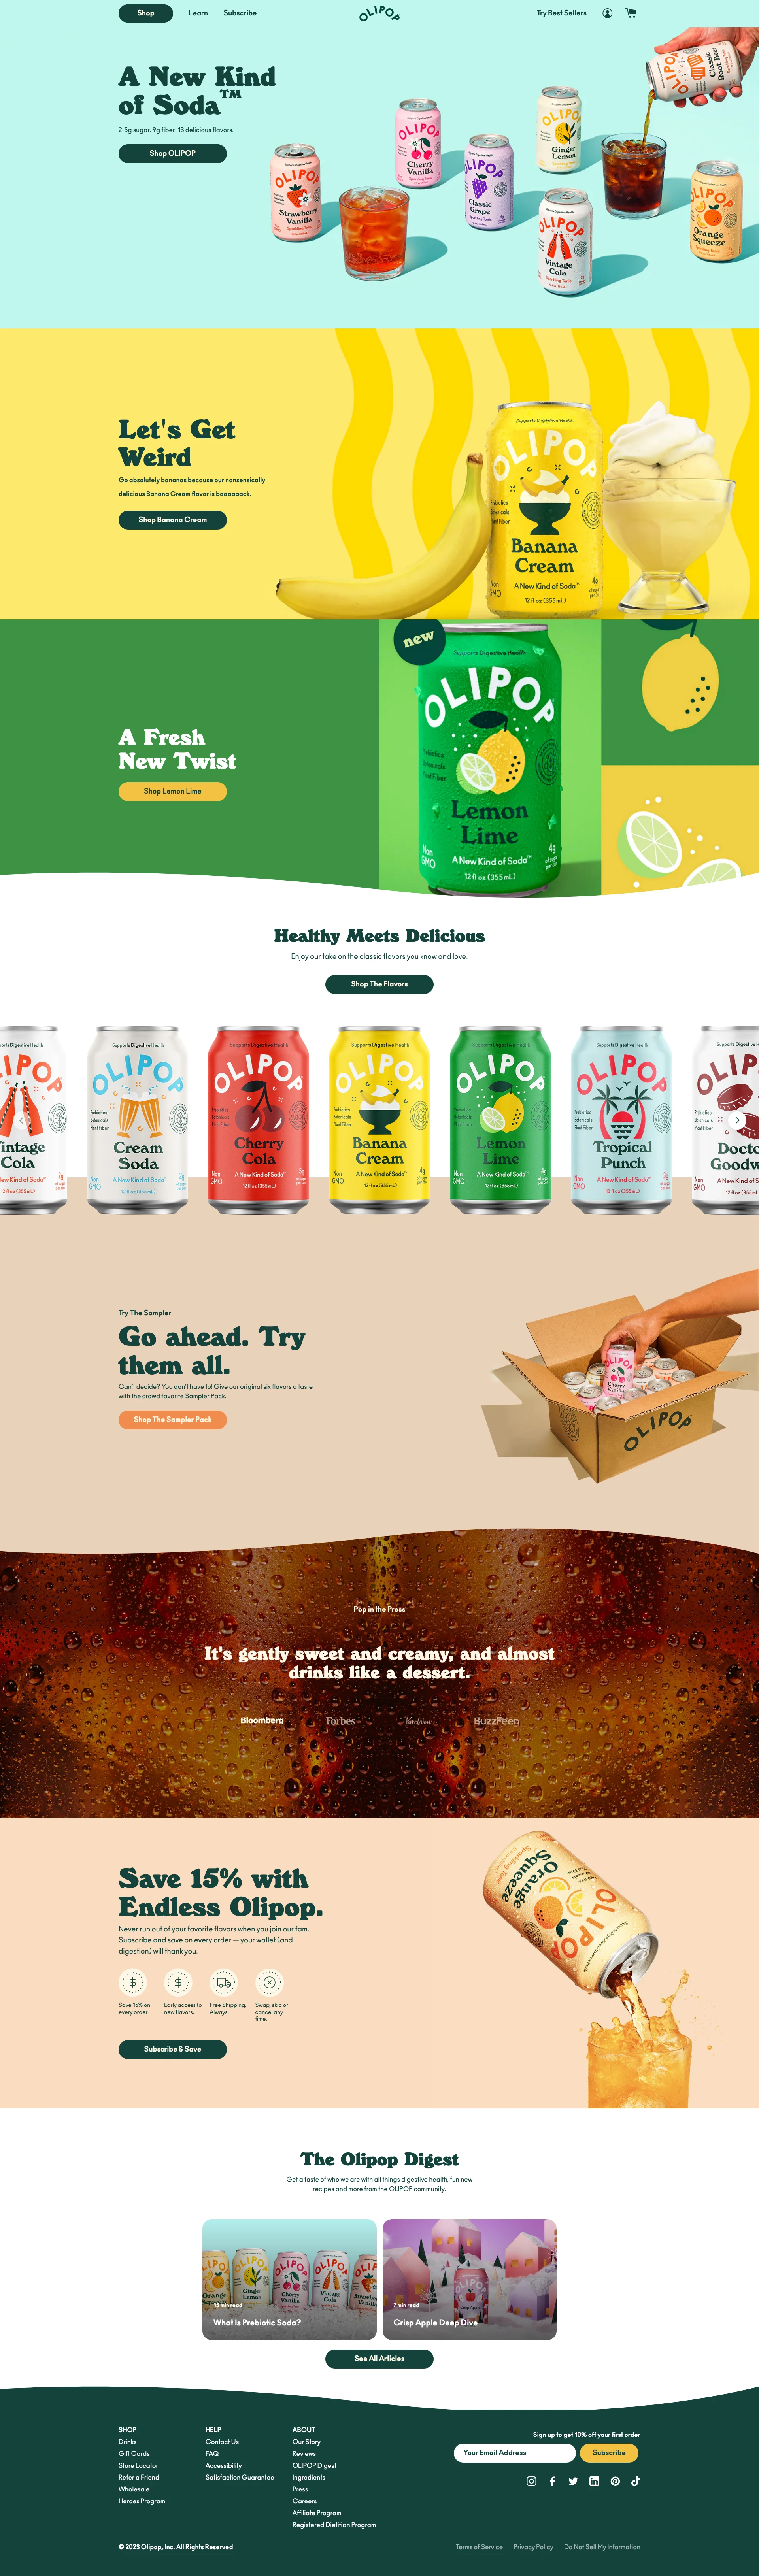 OLIPOP Landing Page Example: 2-5g sugar. 9g fiber. 9 classic flavors. Discover the delicious new soda made with plant fiber and prebiotics for a happy, healthy you. Try it in Vintage Cola, Classic Root Beer, Strawberry Vanilla, Ginger Lemon and more. Non-GMO, gluten free, paleo, vegan, and just plain delicious.